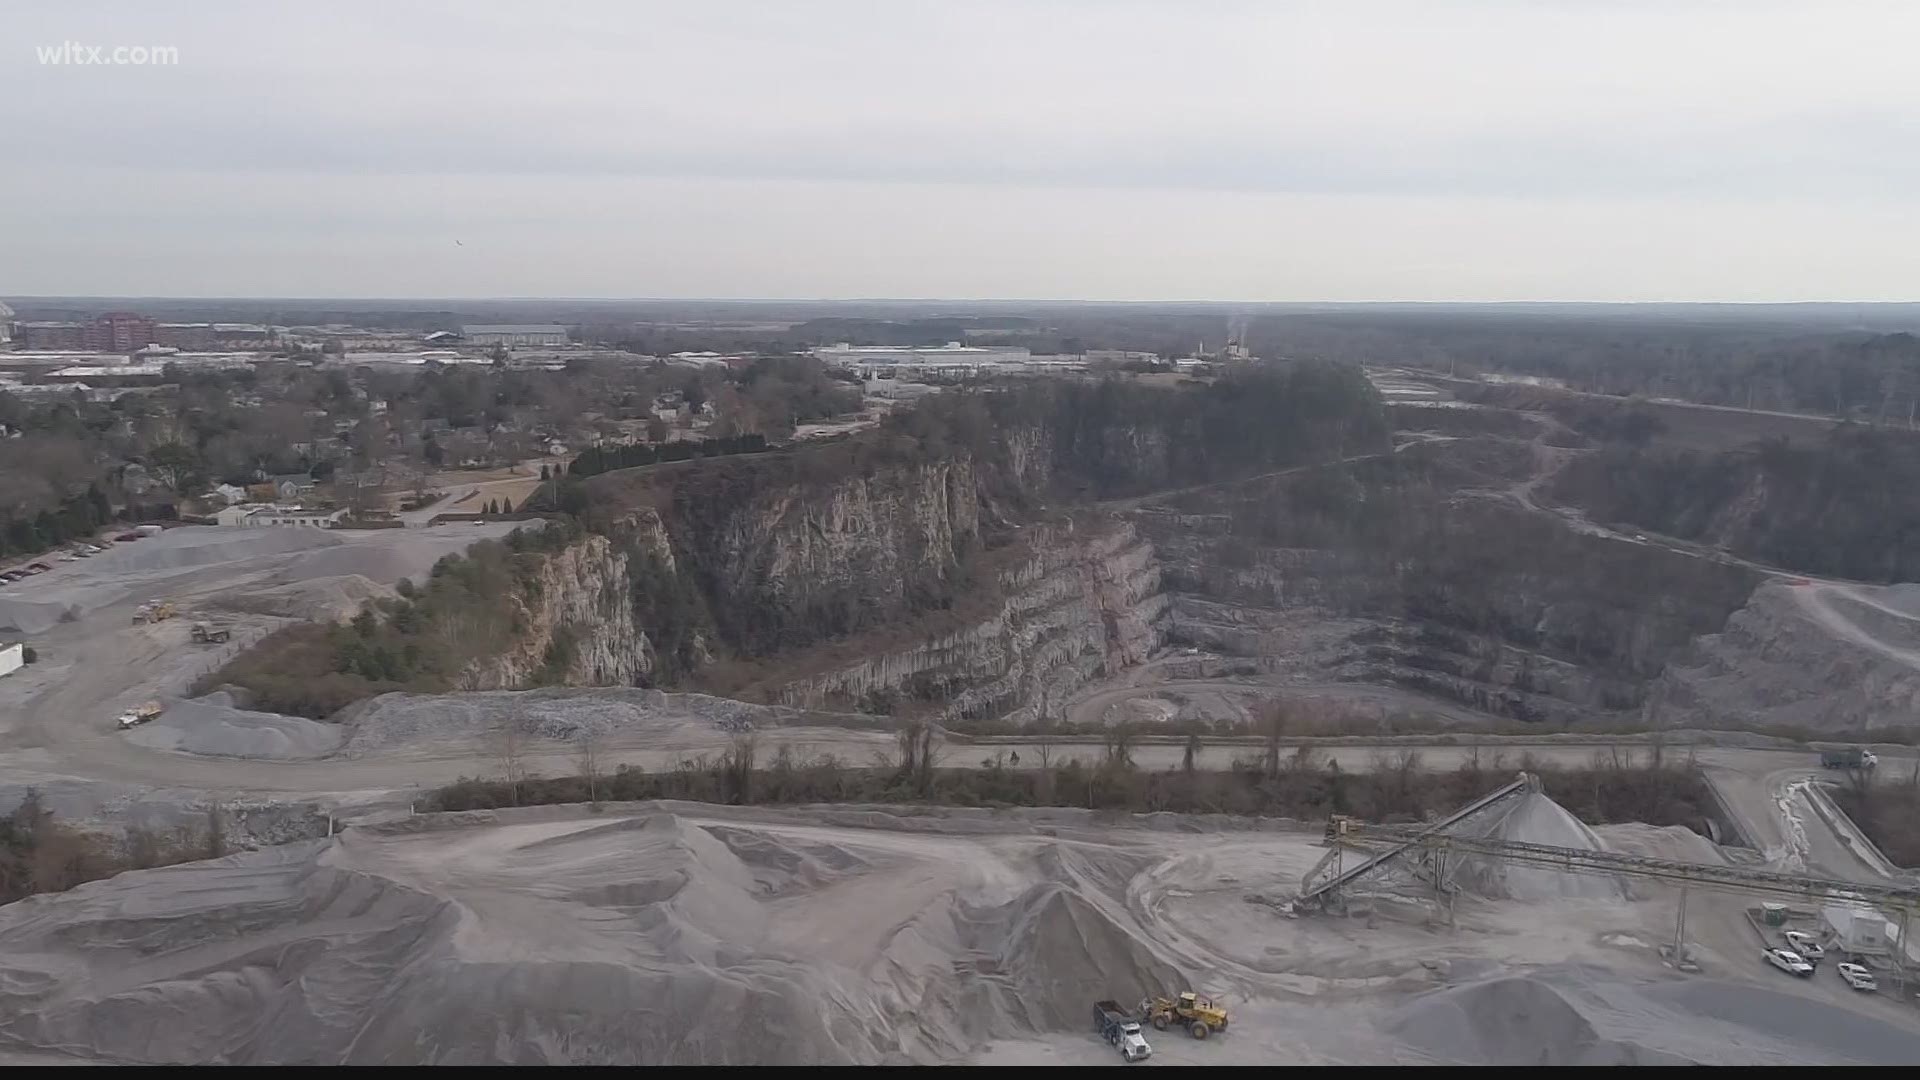 The incident happened Wednesday at the Vulcan Company Materials Rock Quarry in Columbia.